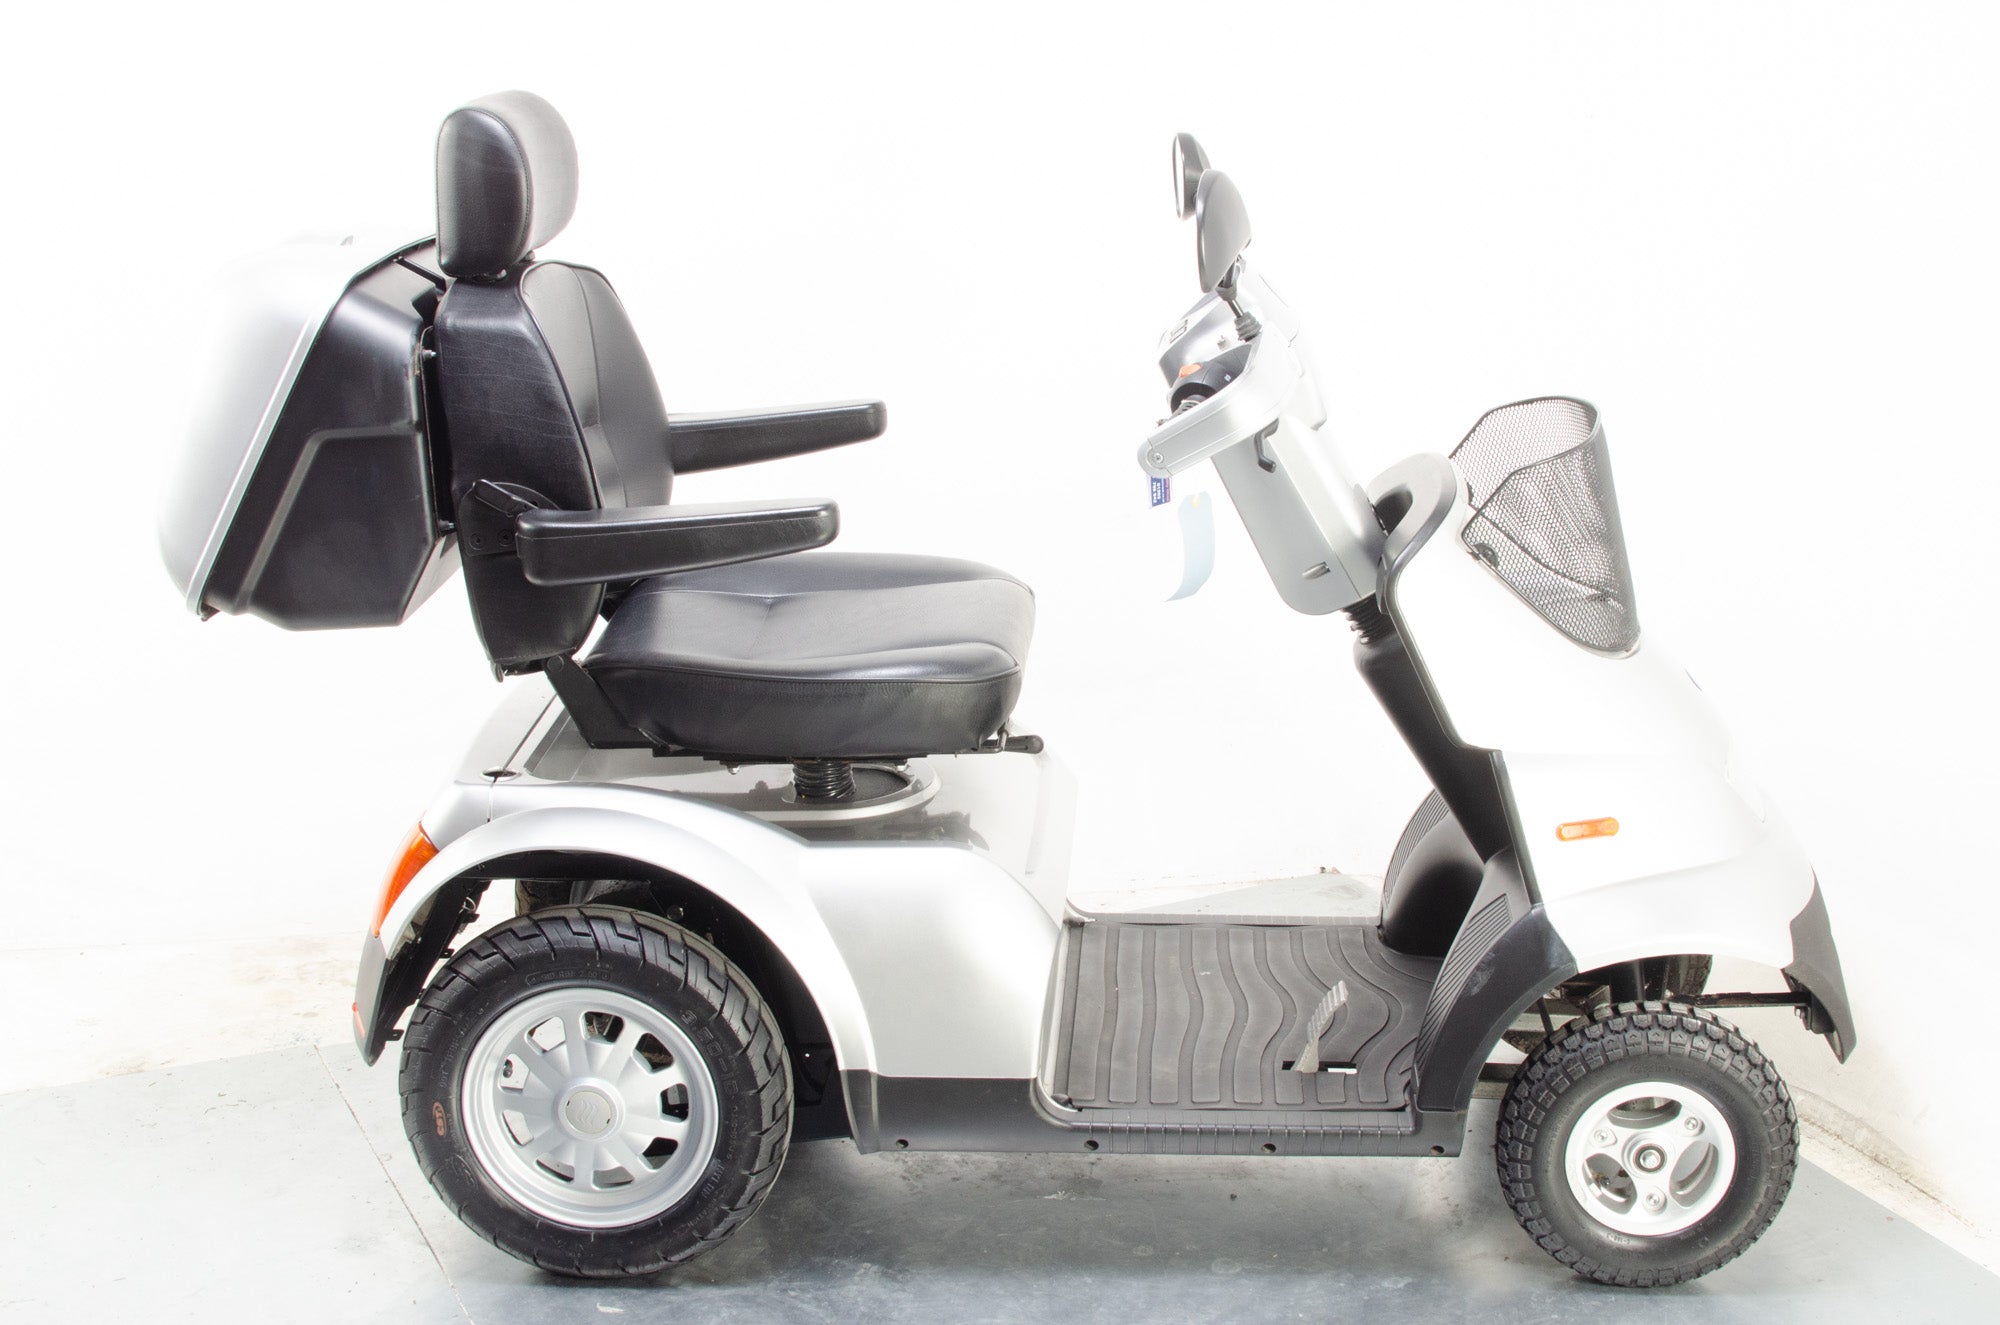 2015 TGA Breeze S4 8mph Large All Terrain Mobility Mobility Scooter